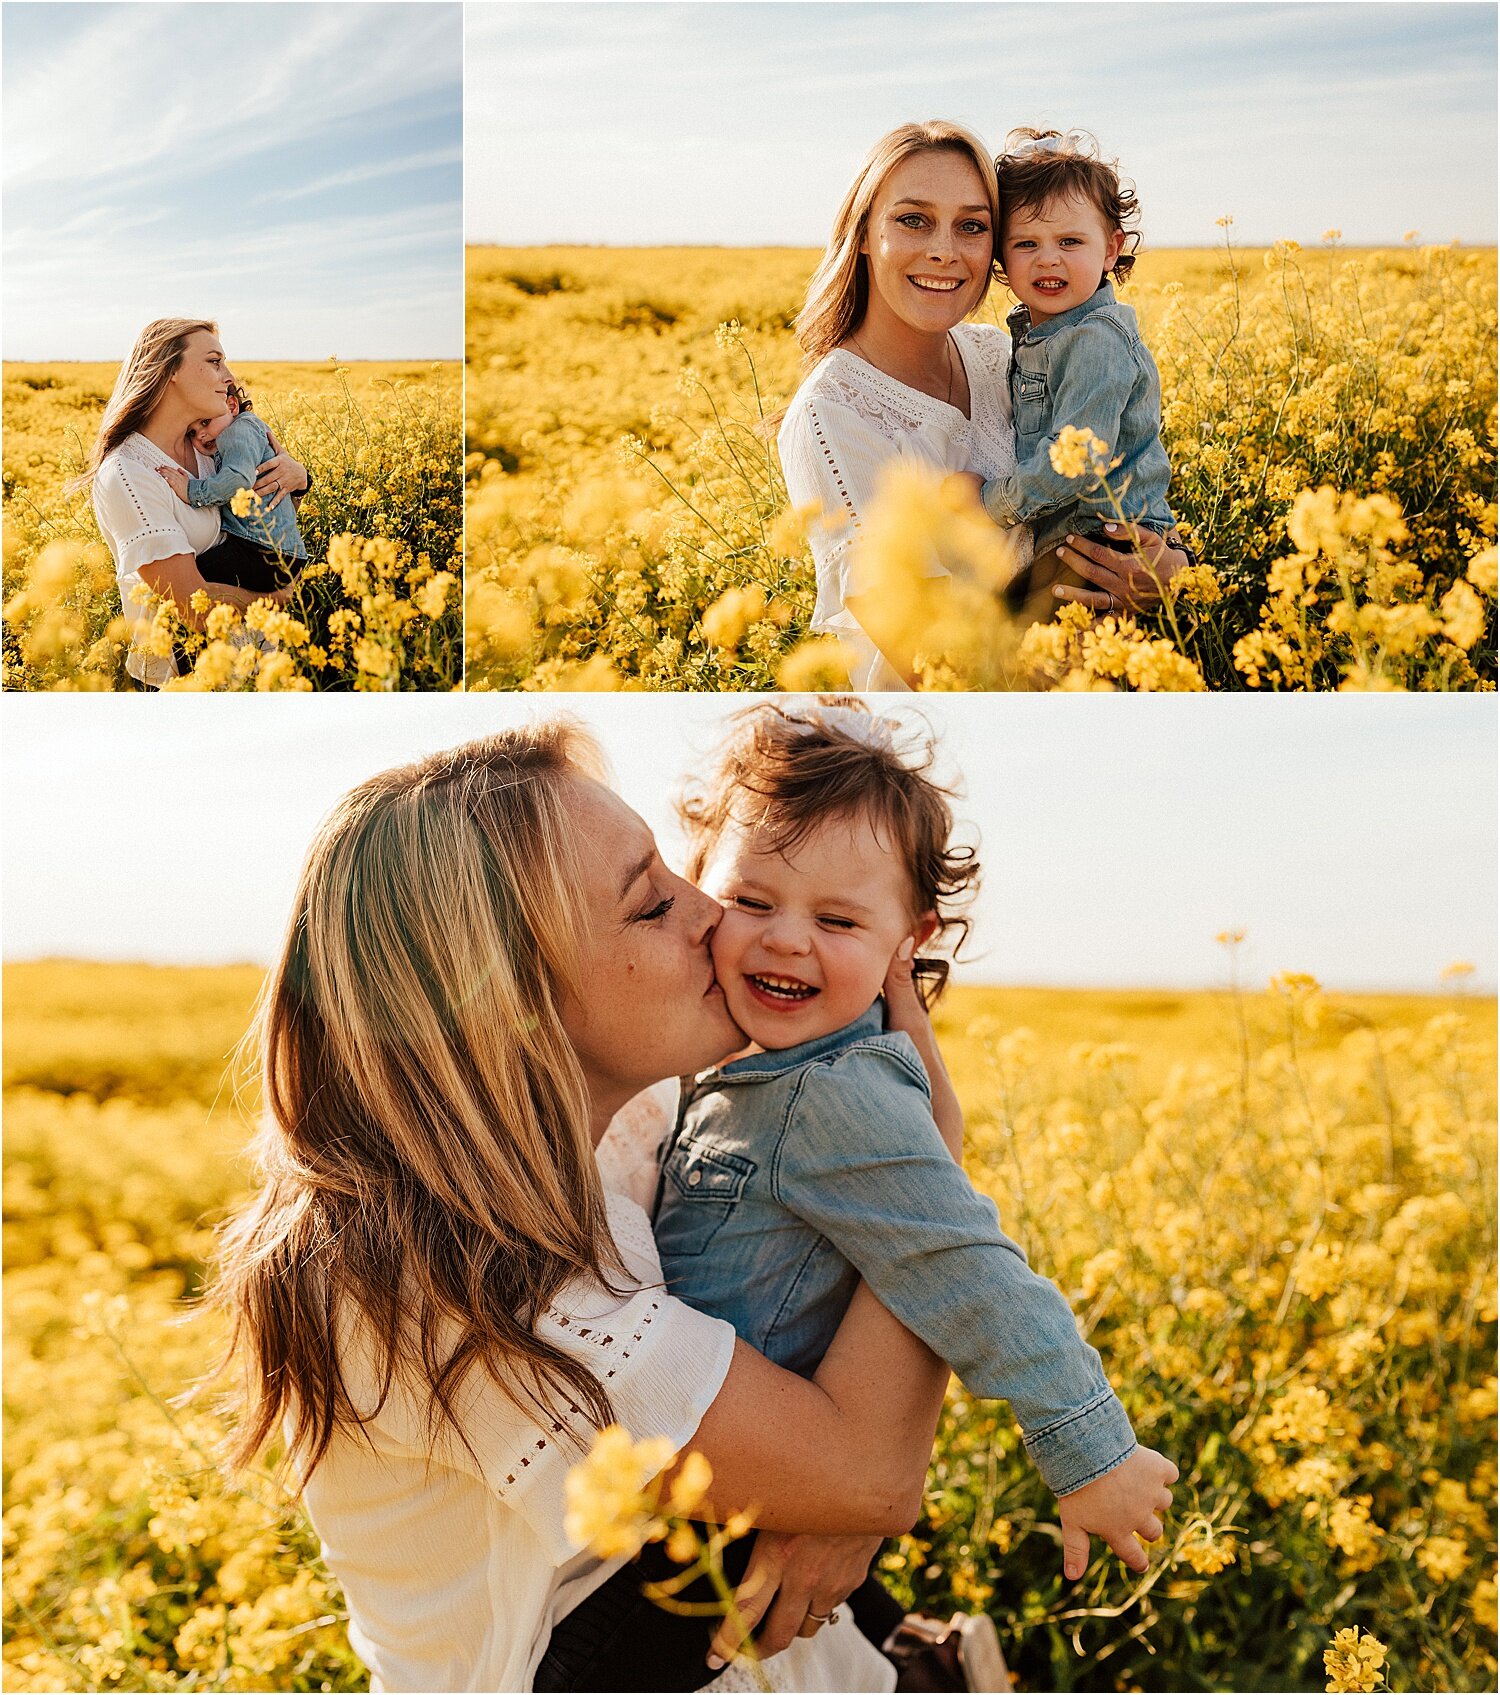 spring field of yellow flowers family session12.jpg